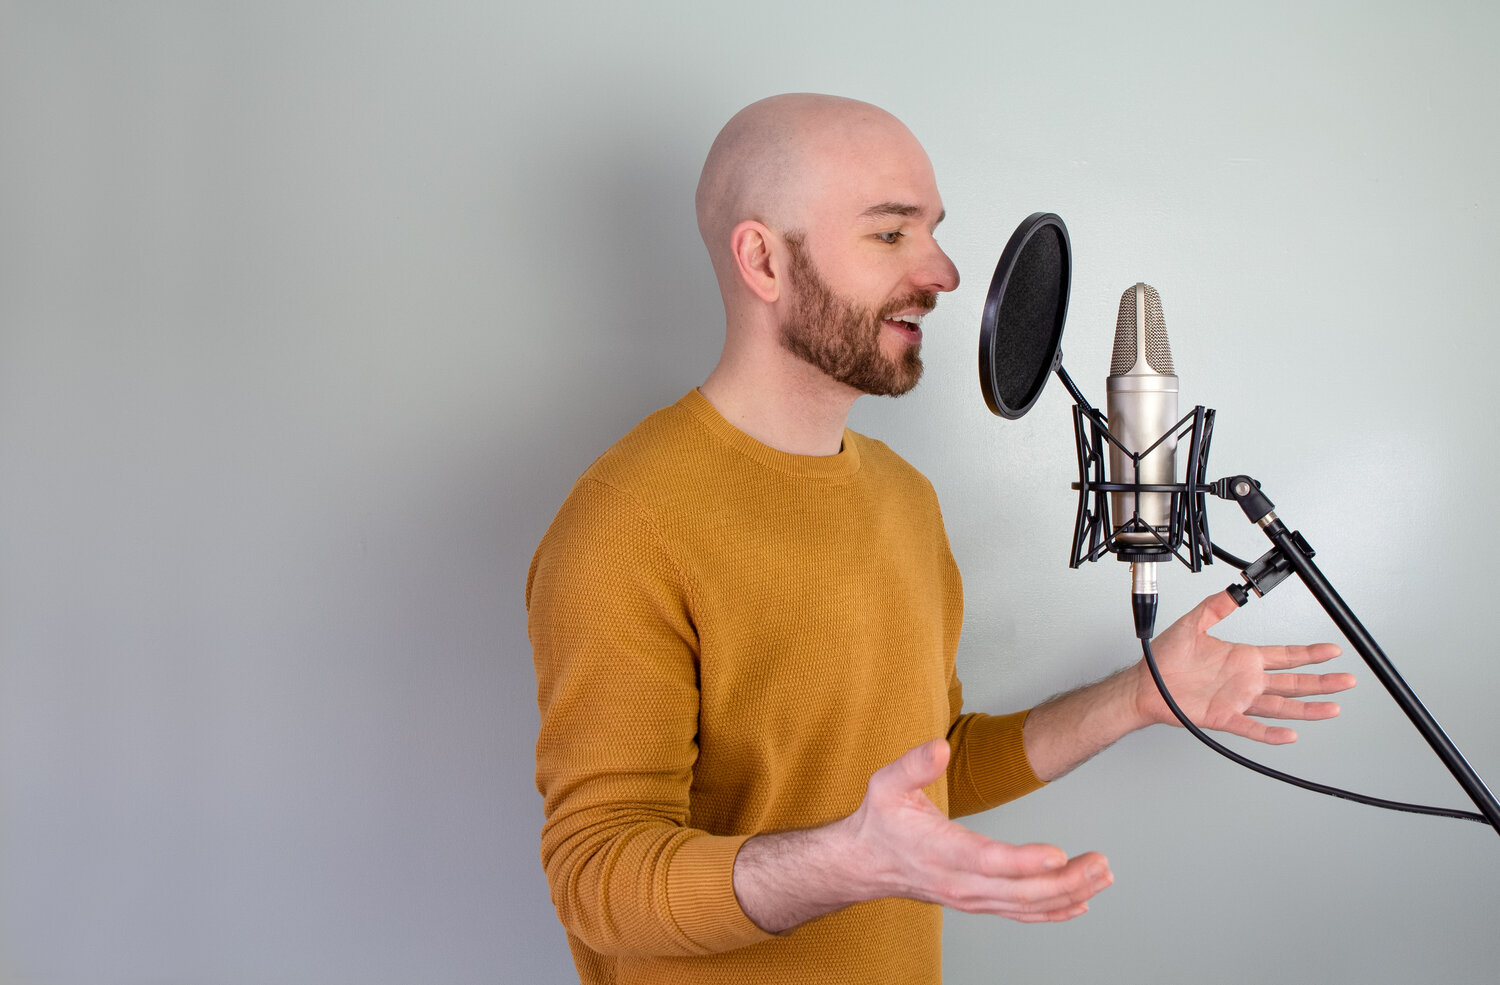 Bald headed man wearing his favourite mustard coloured jumper speaking closely into a professional microphone